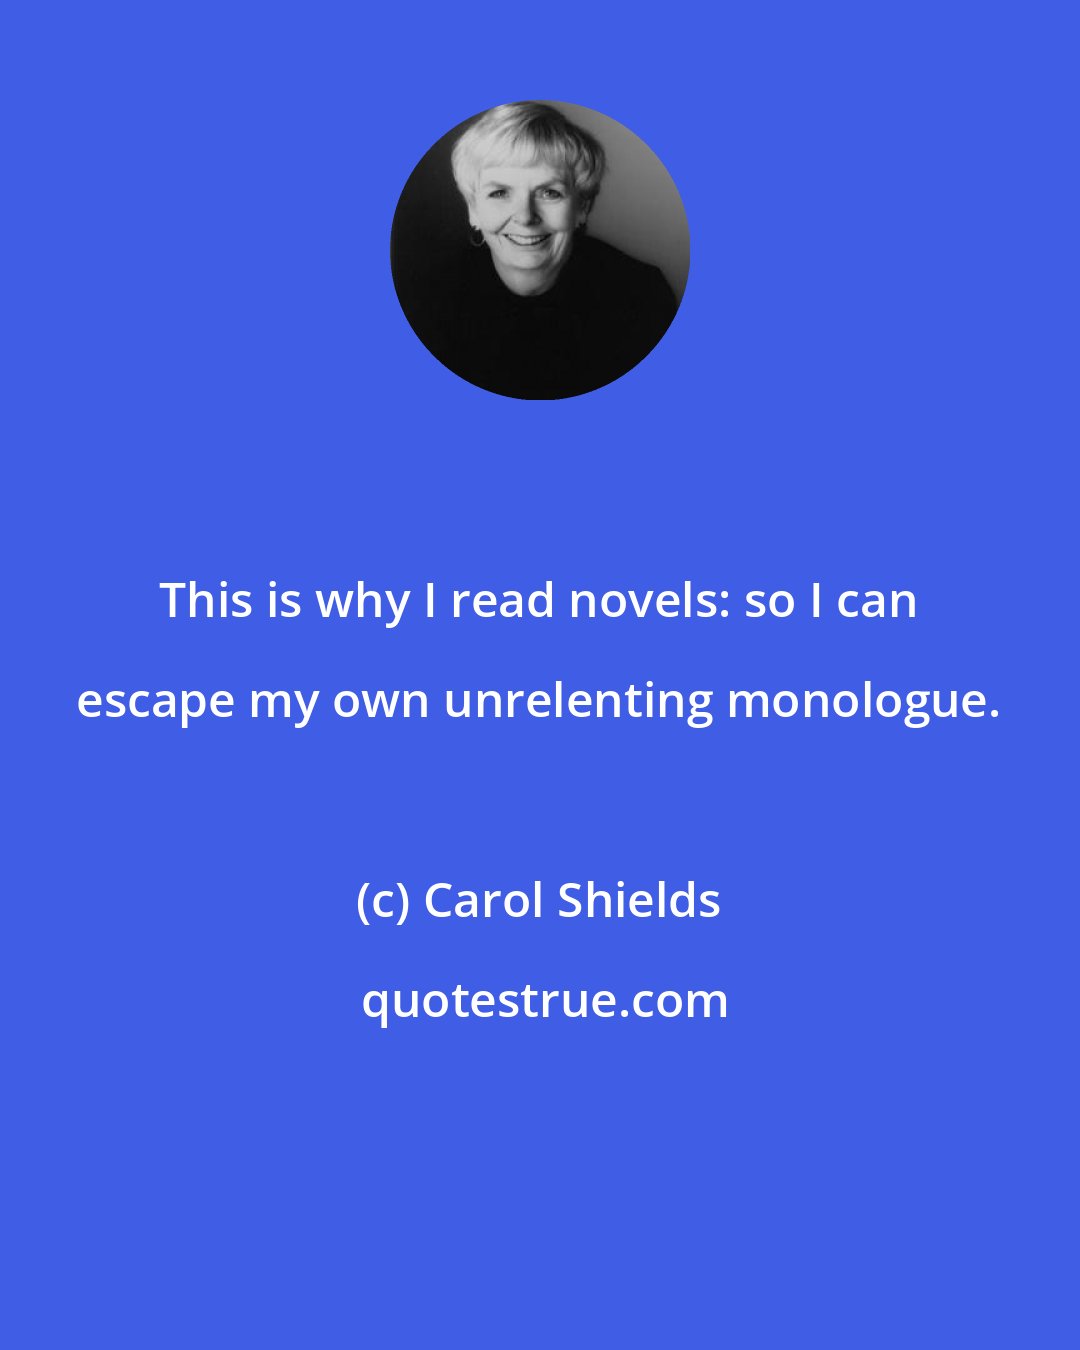 Carol Shields: This is why I read novels: so I can escape my own unrelenting monologue.